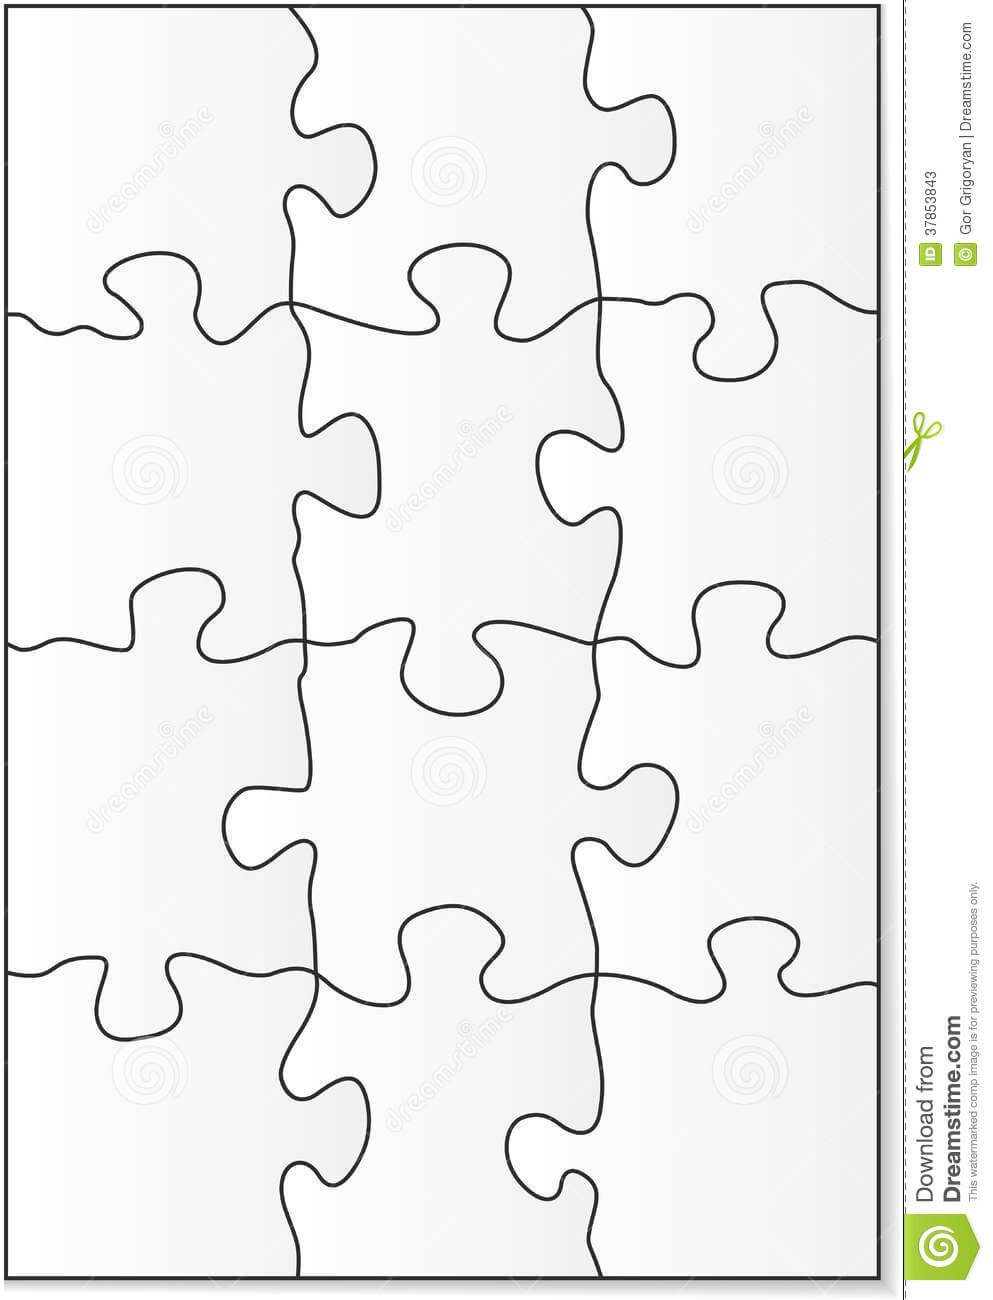 12 Piece Puzzle Template Stock Vector. Illustration Of In Blank Pattern Block Templates